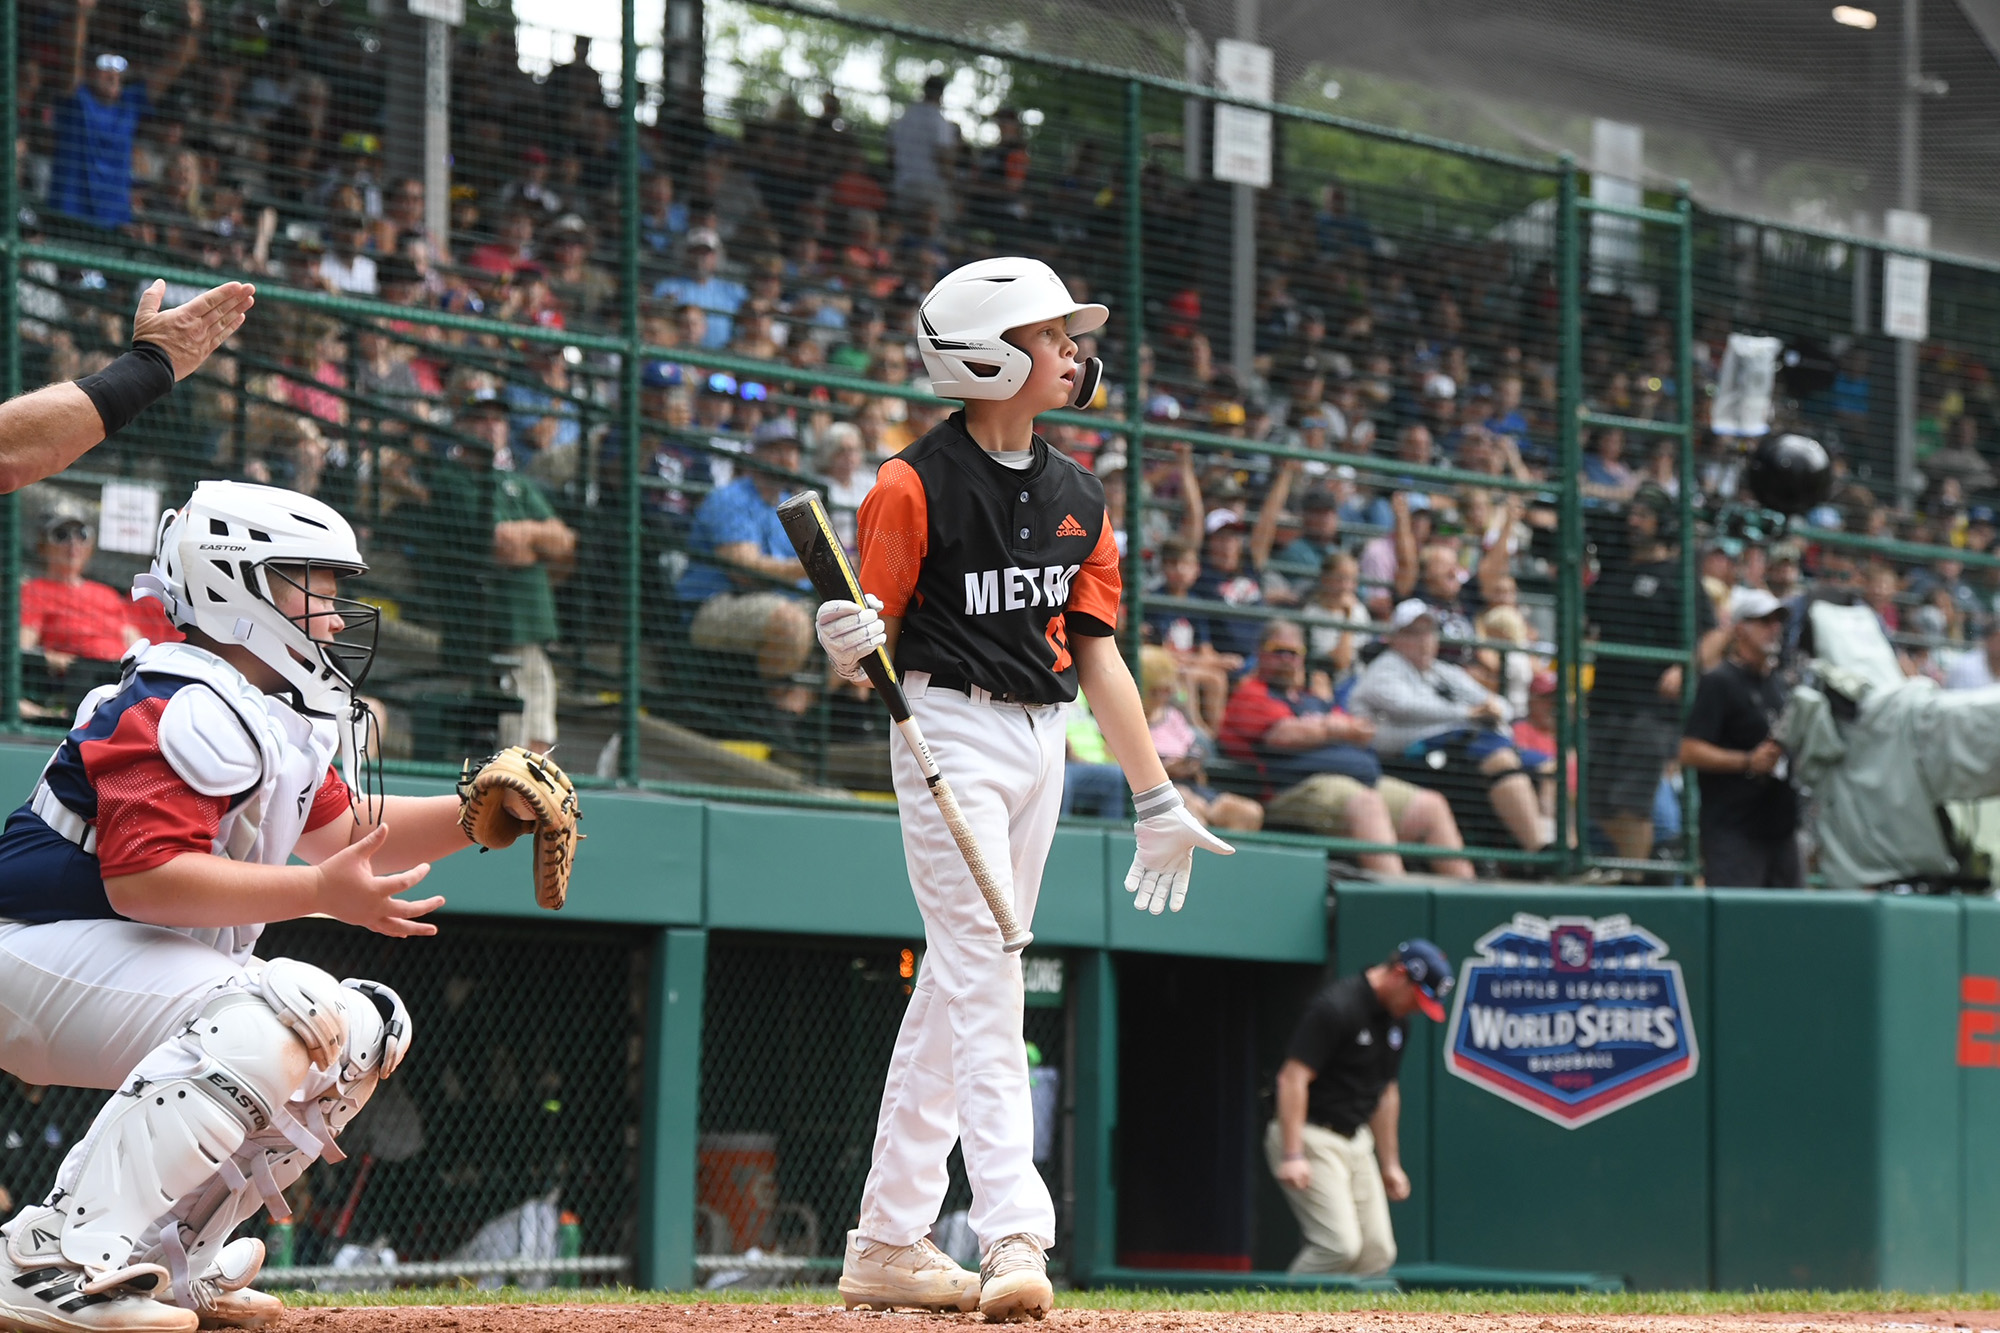 Massapequa Coast was eliminated from the Little League World Series Monday with a loss to Hollidaysburg.